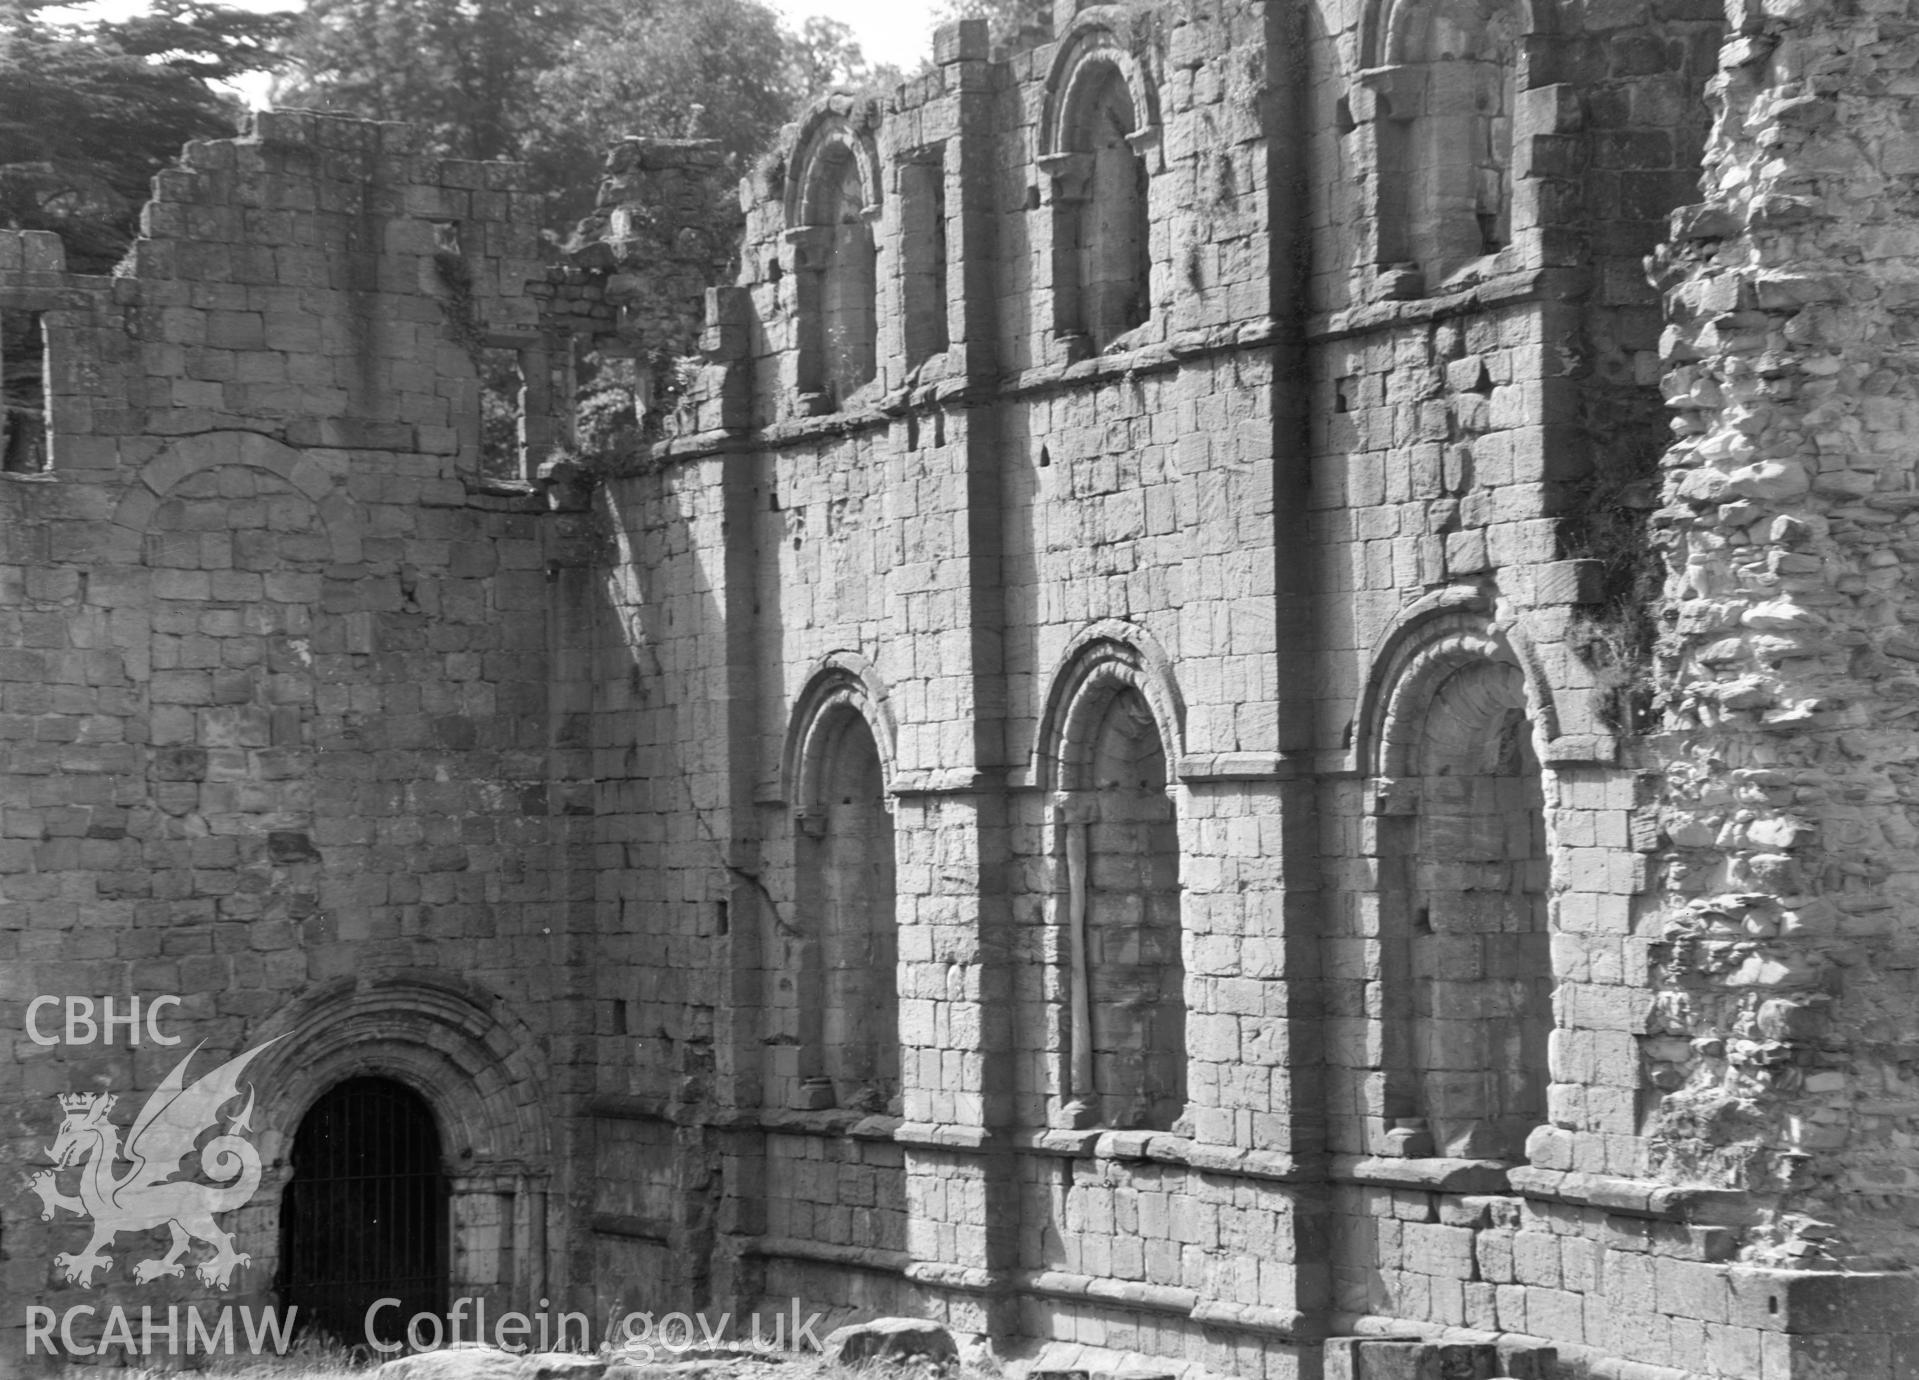 Digital copy of a black and white acetate negative showing exterior detail at St. David's Cathedral, taken by E.W. Lovegrove, July 1936